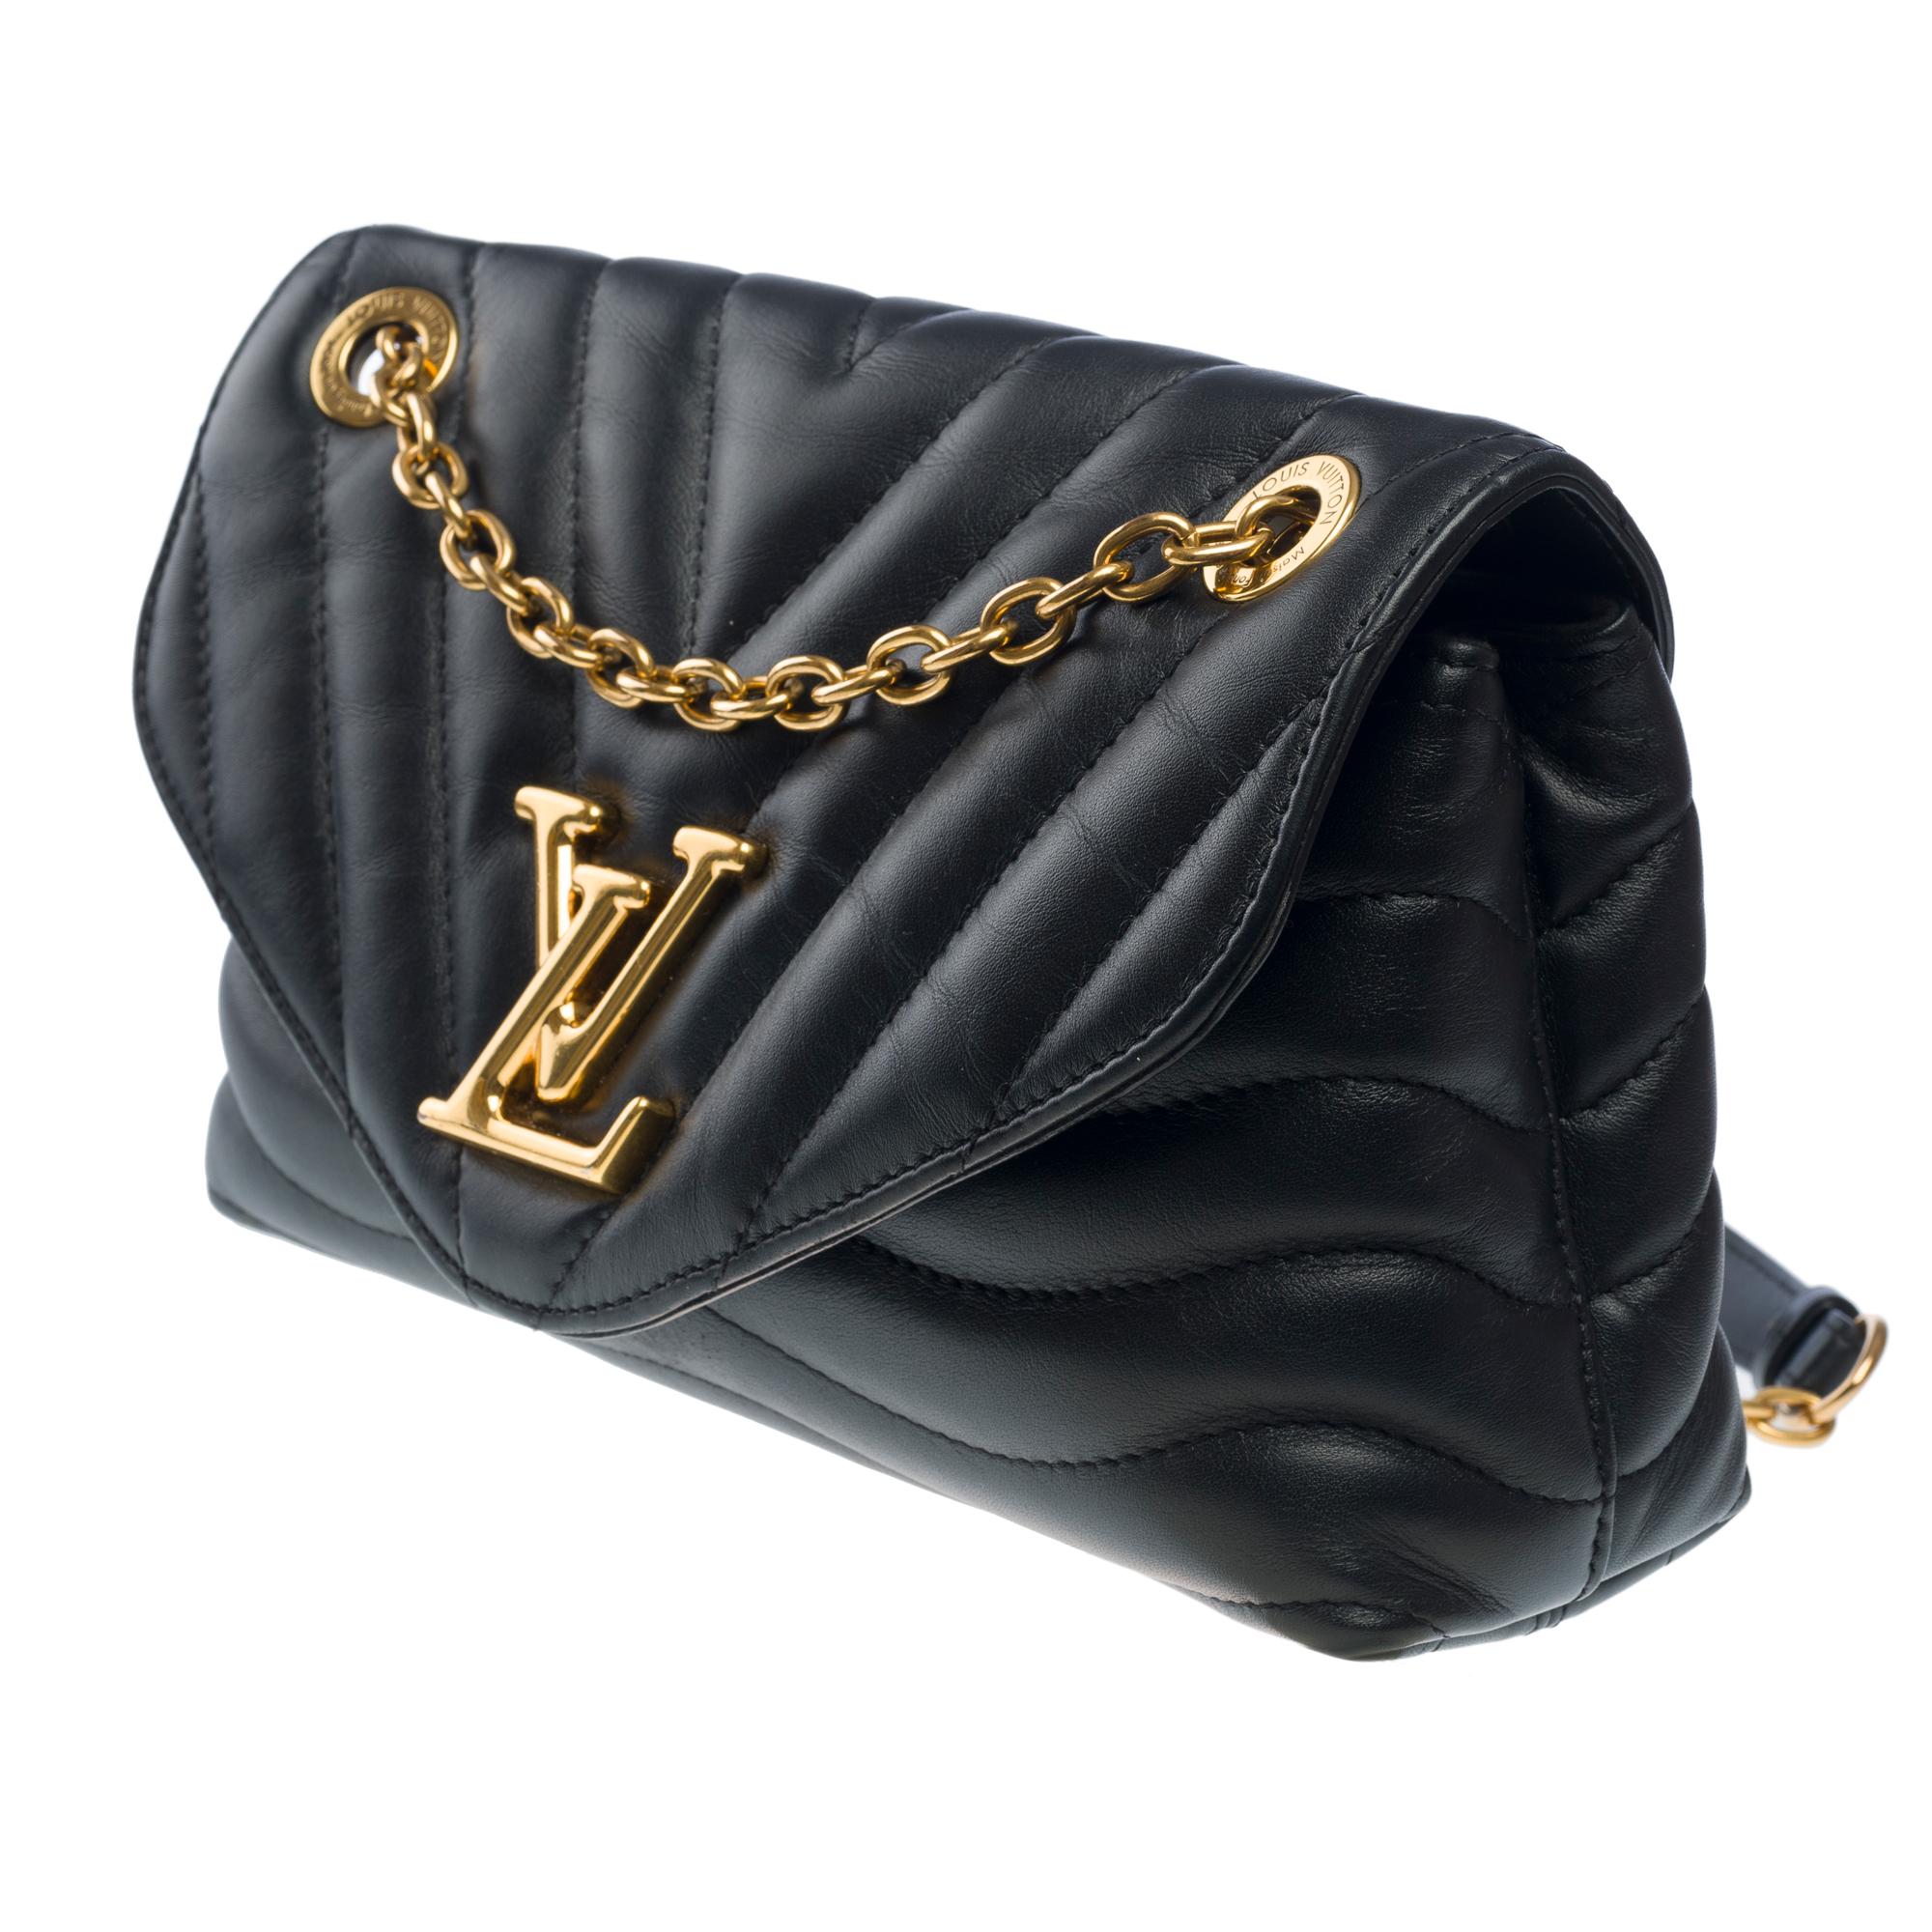 Women's or Men's Louis Vuitton Wave shoulder bag in Black quilted calf leather, GHW